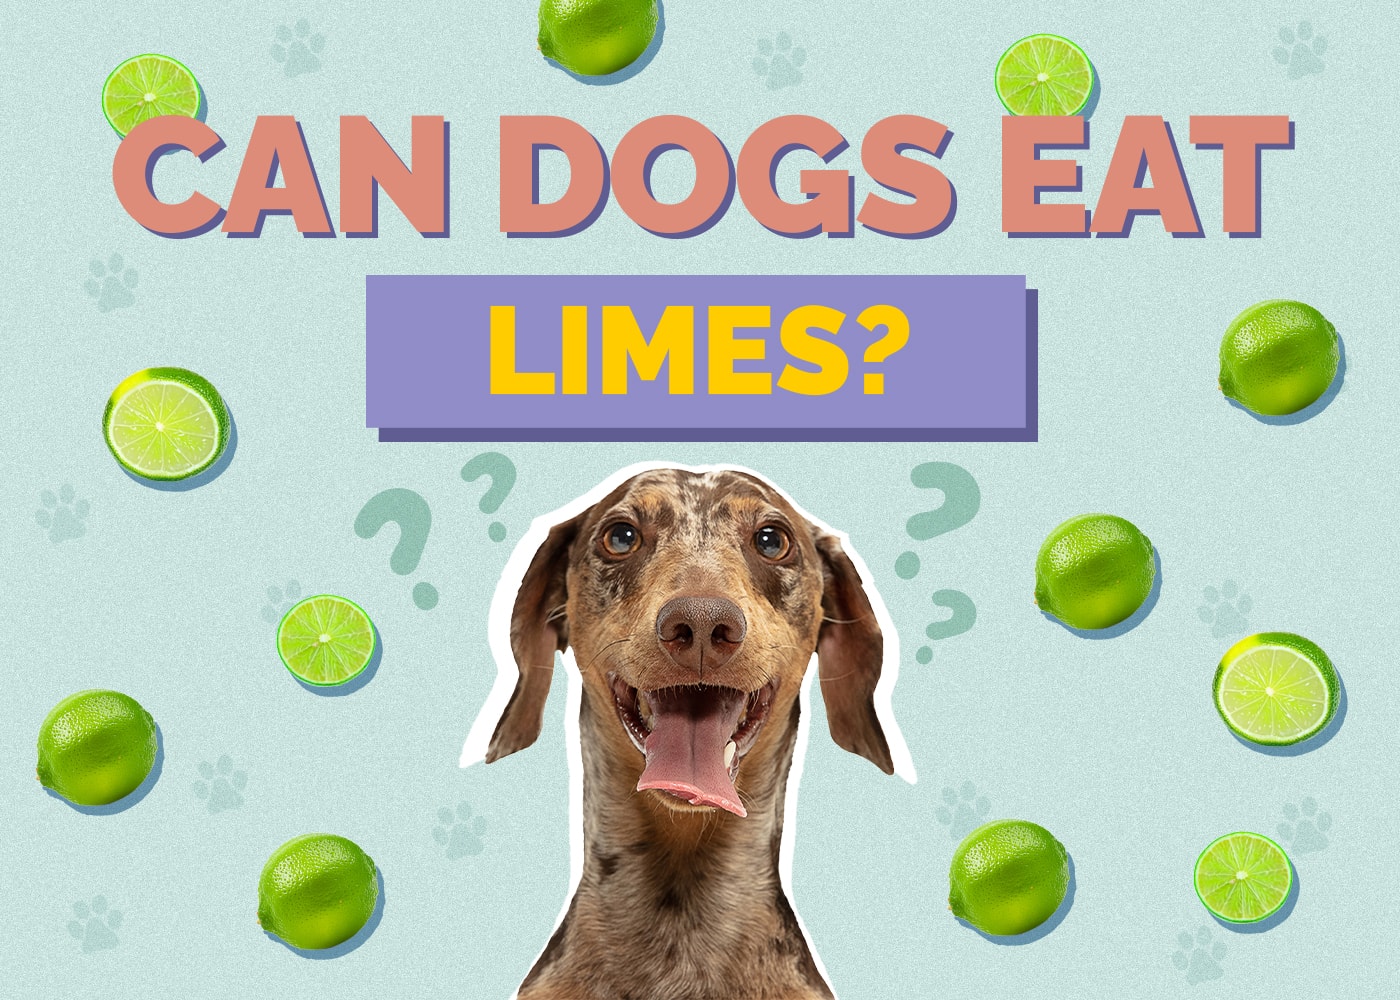 Can Dogs Eat limes